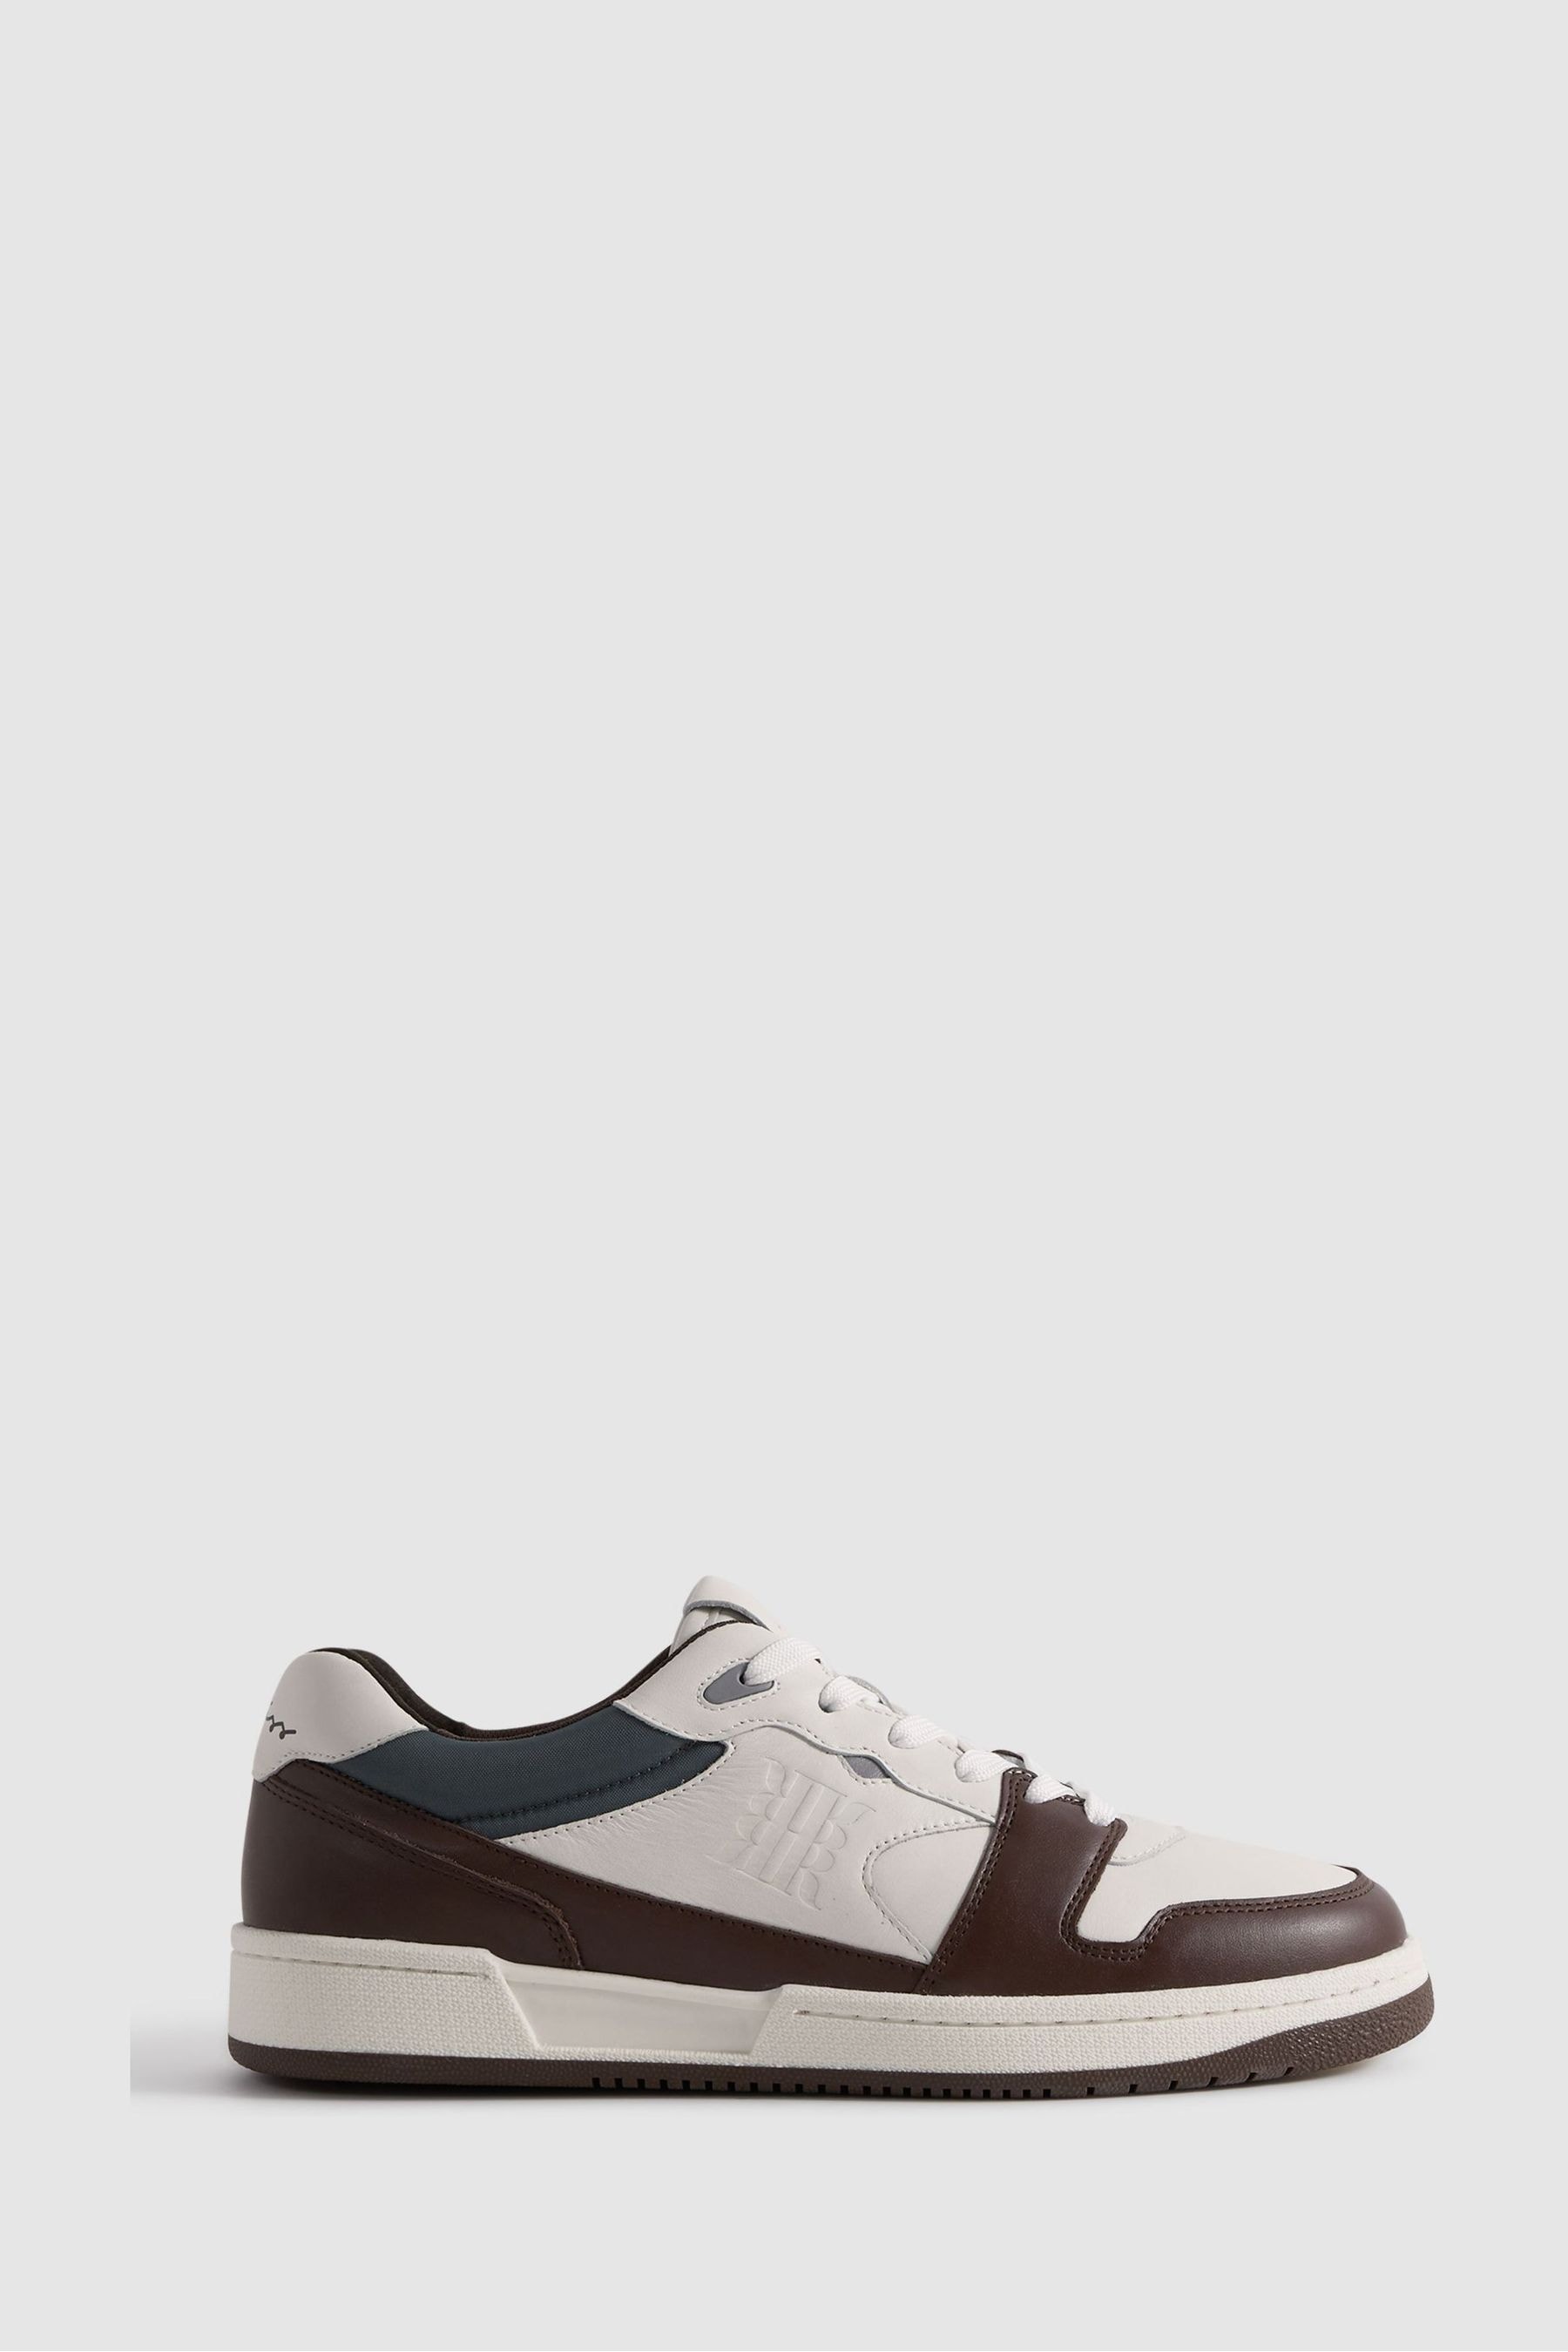 Reiss Astor - Brown Leather Lace-up Trainers, Uk 9 Eu 43